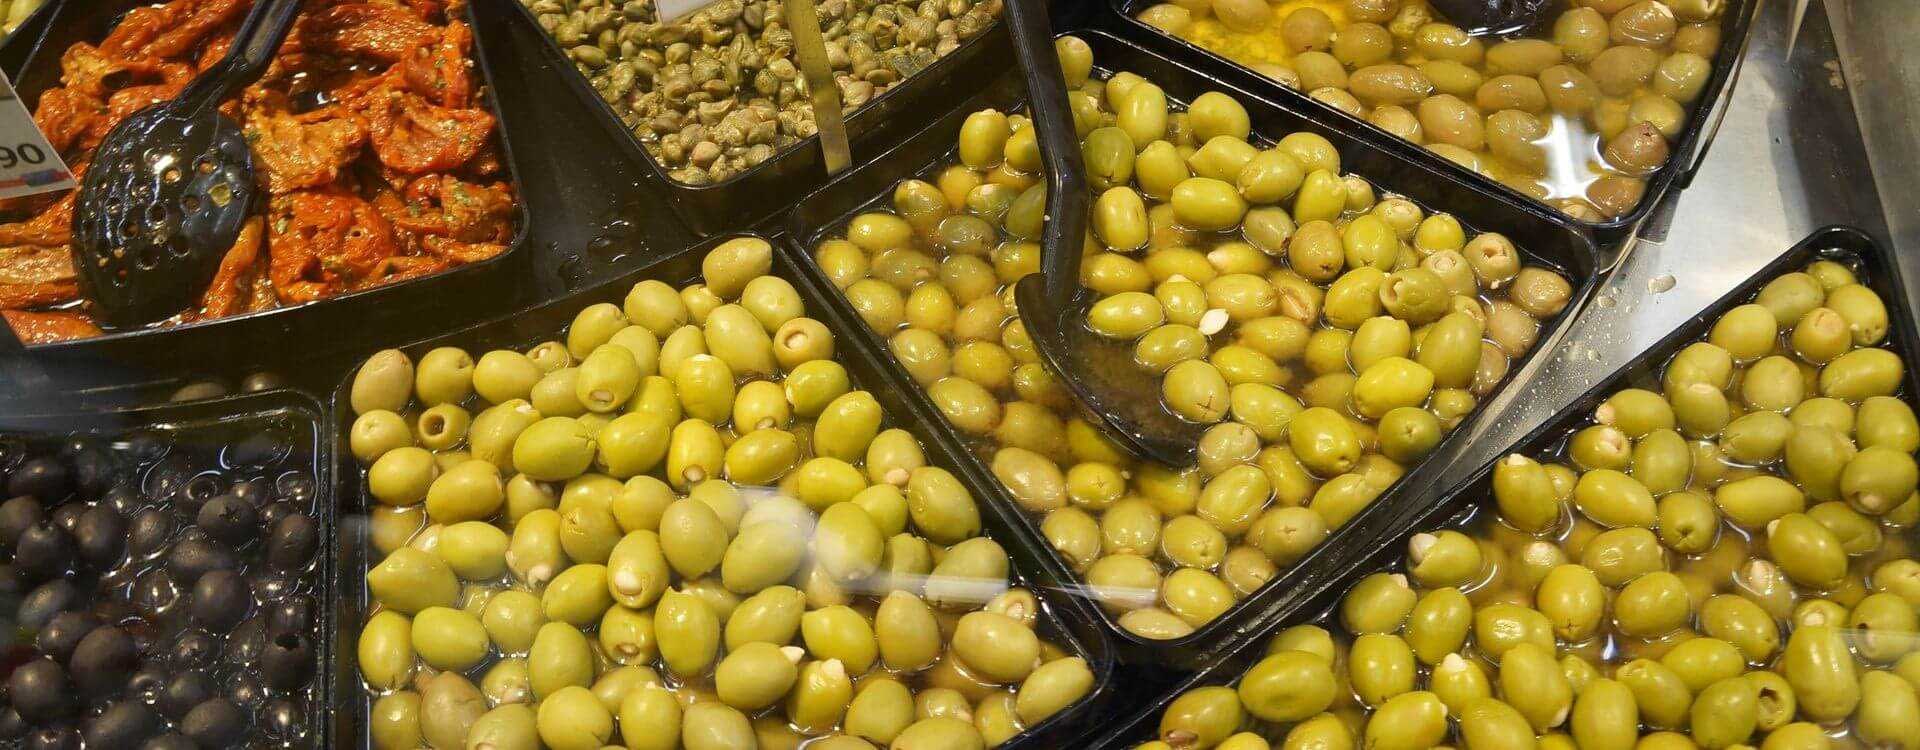 FOCUS: IMPORTS OF TABLE OLIVES - International Olive Council